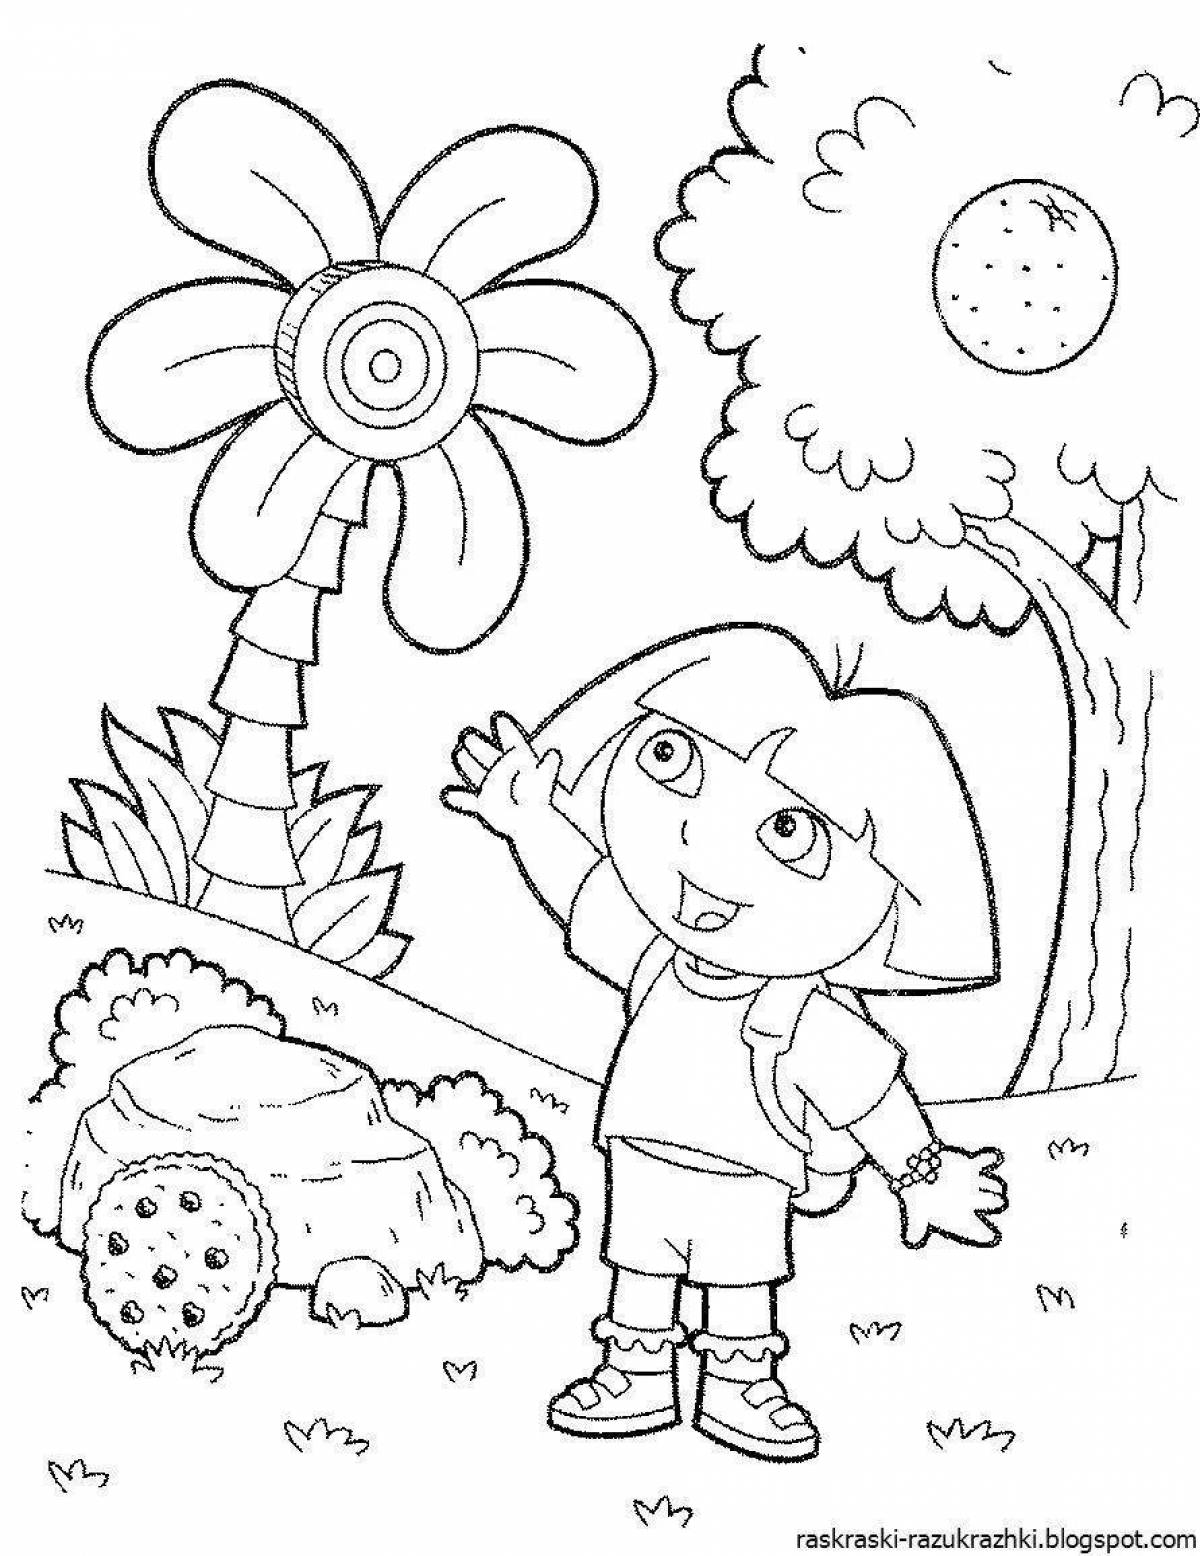 Great nature coloring book for 7-8 year olds